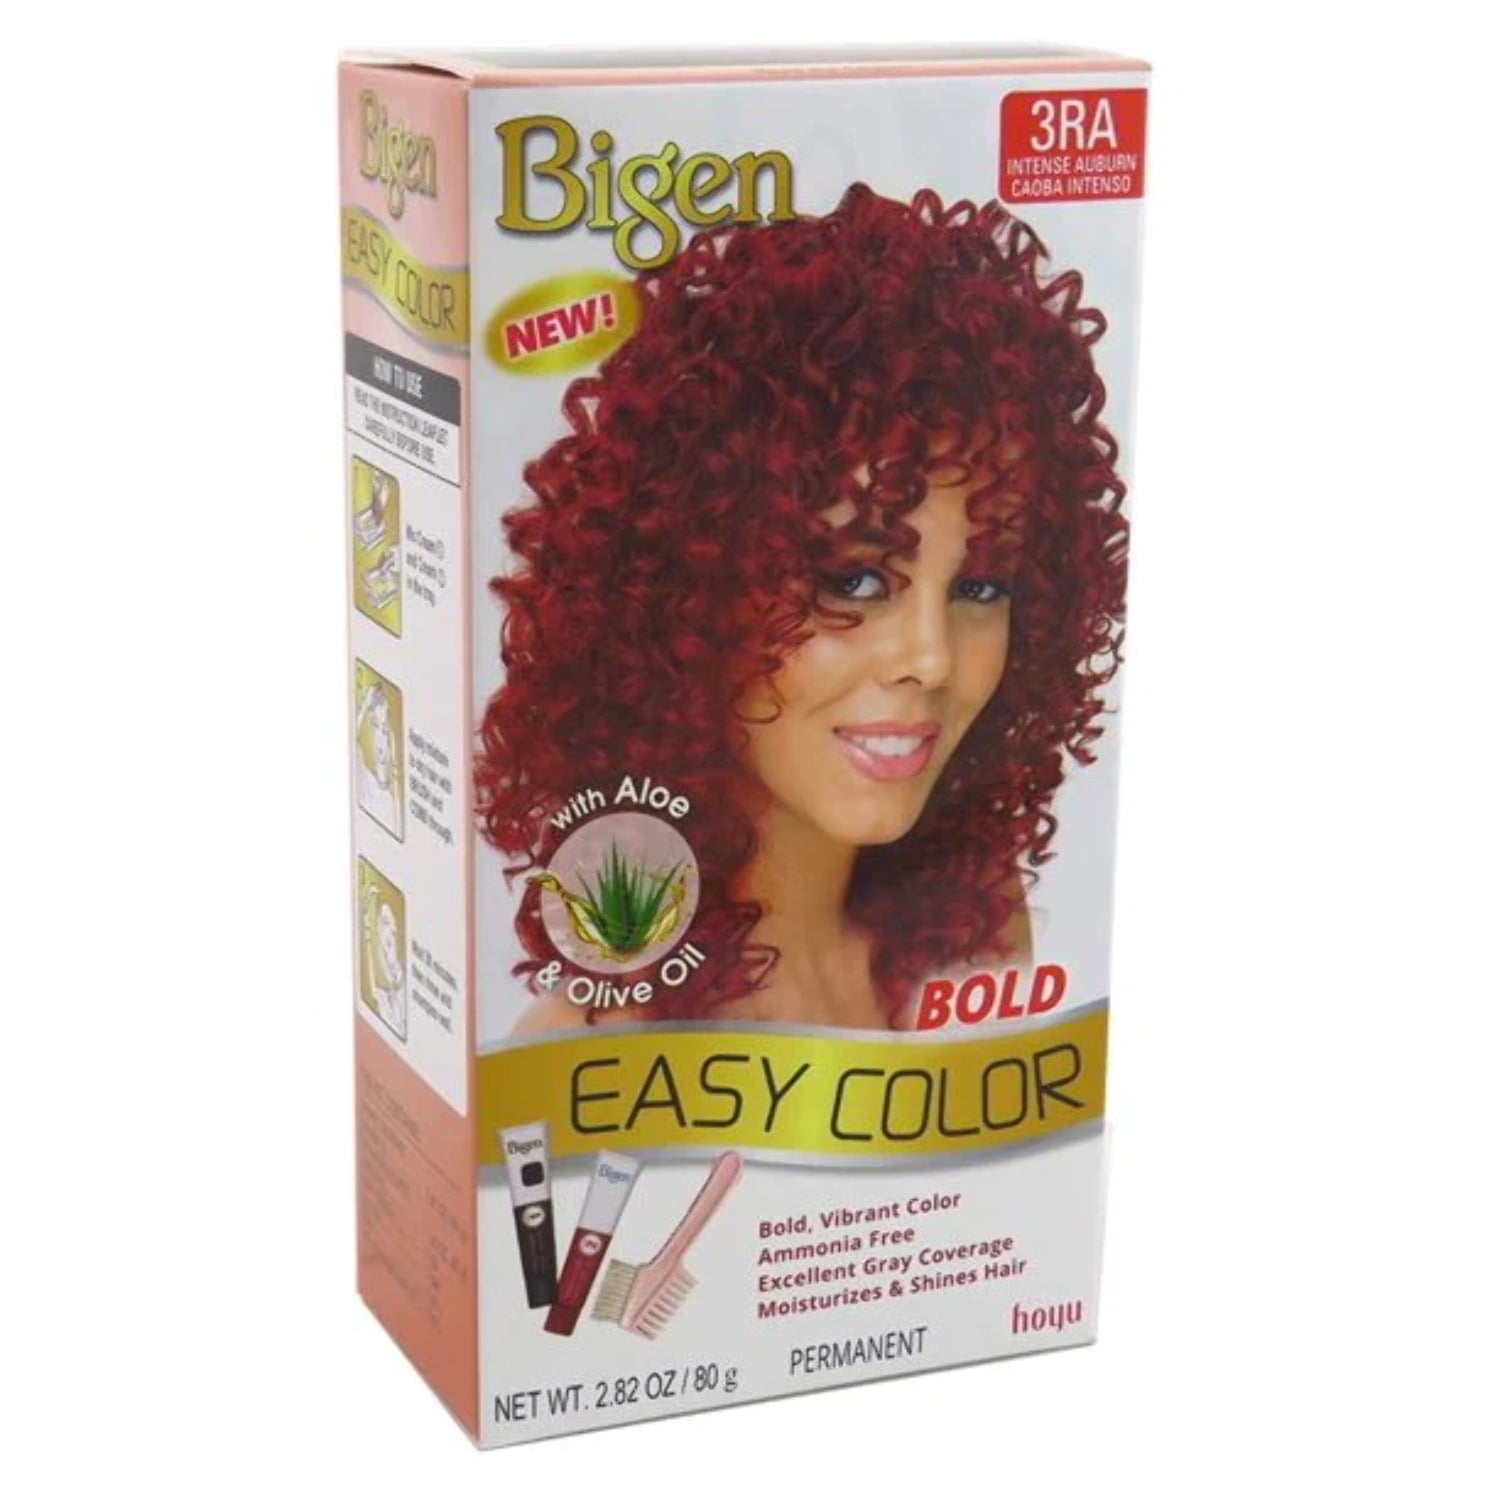 Color Oops Conditioning Bleach with Coconut Oil, Ammonia Free, 1  Application Kit